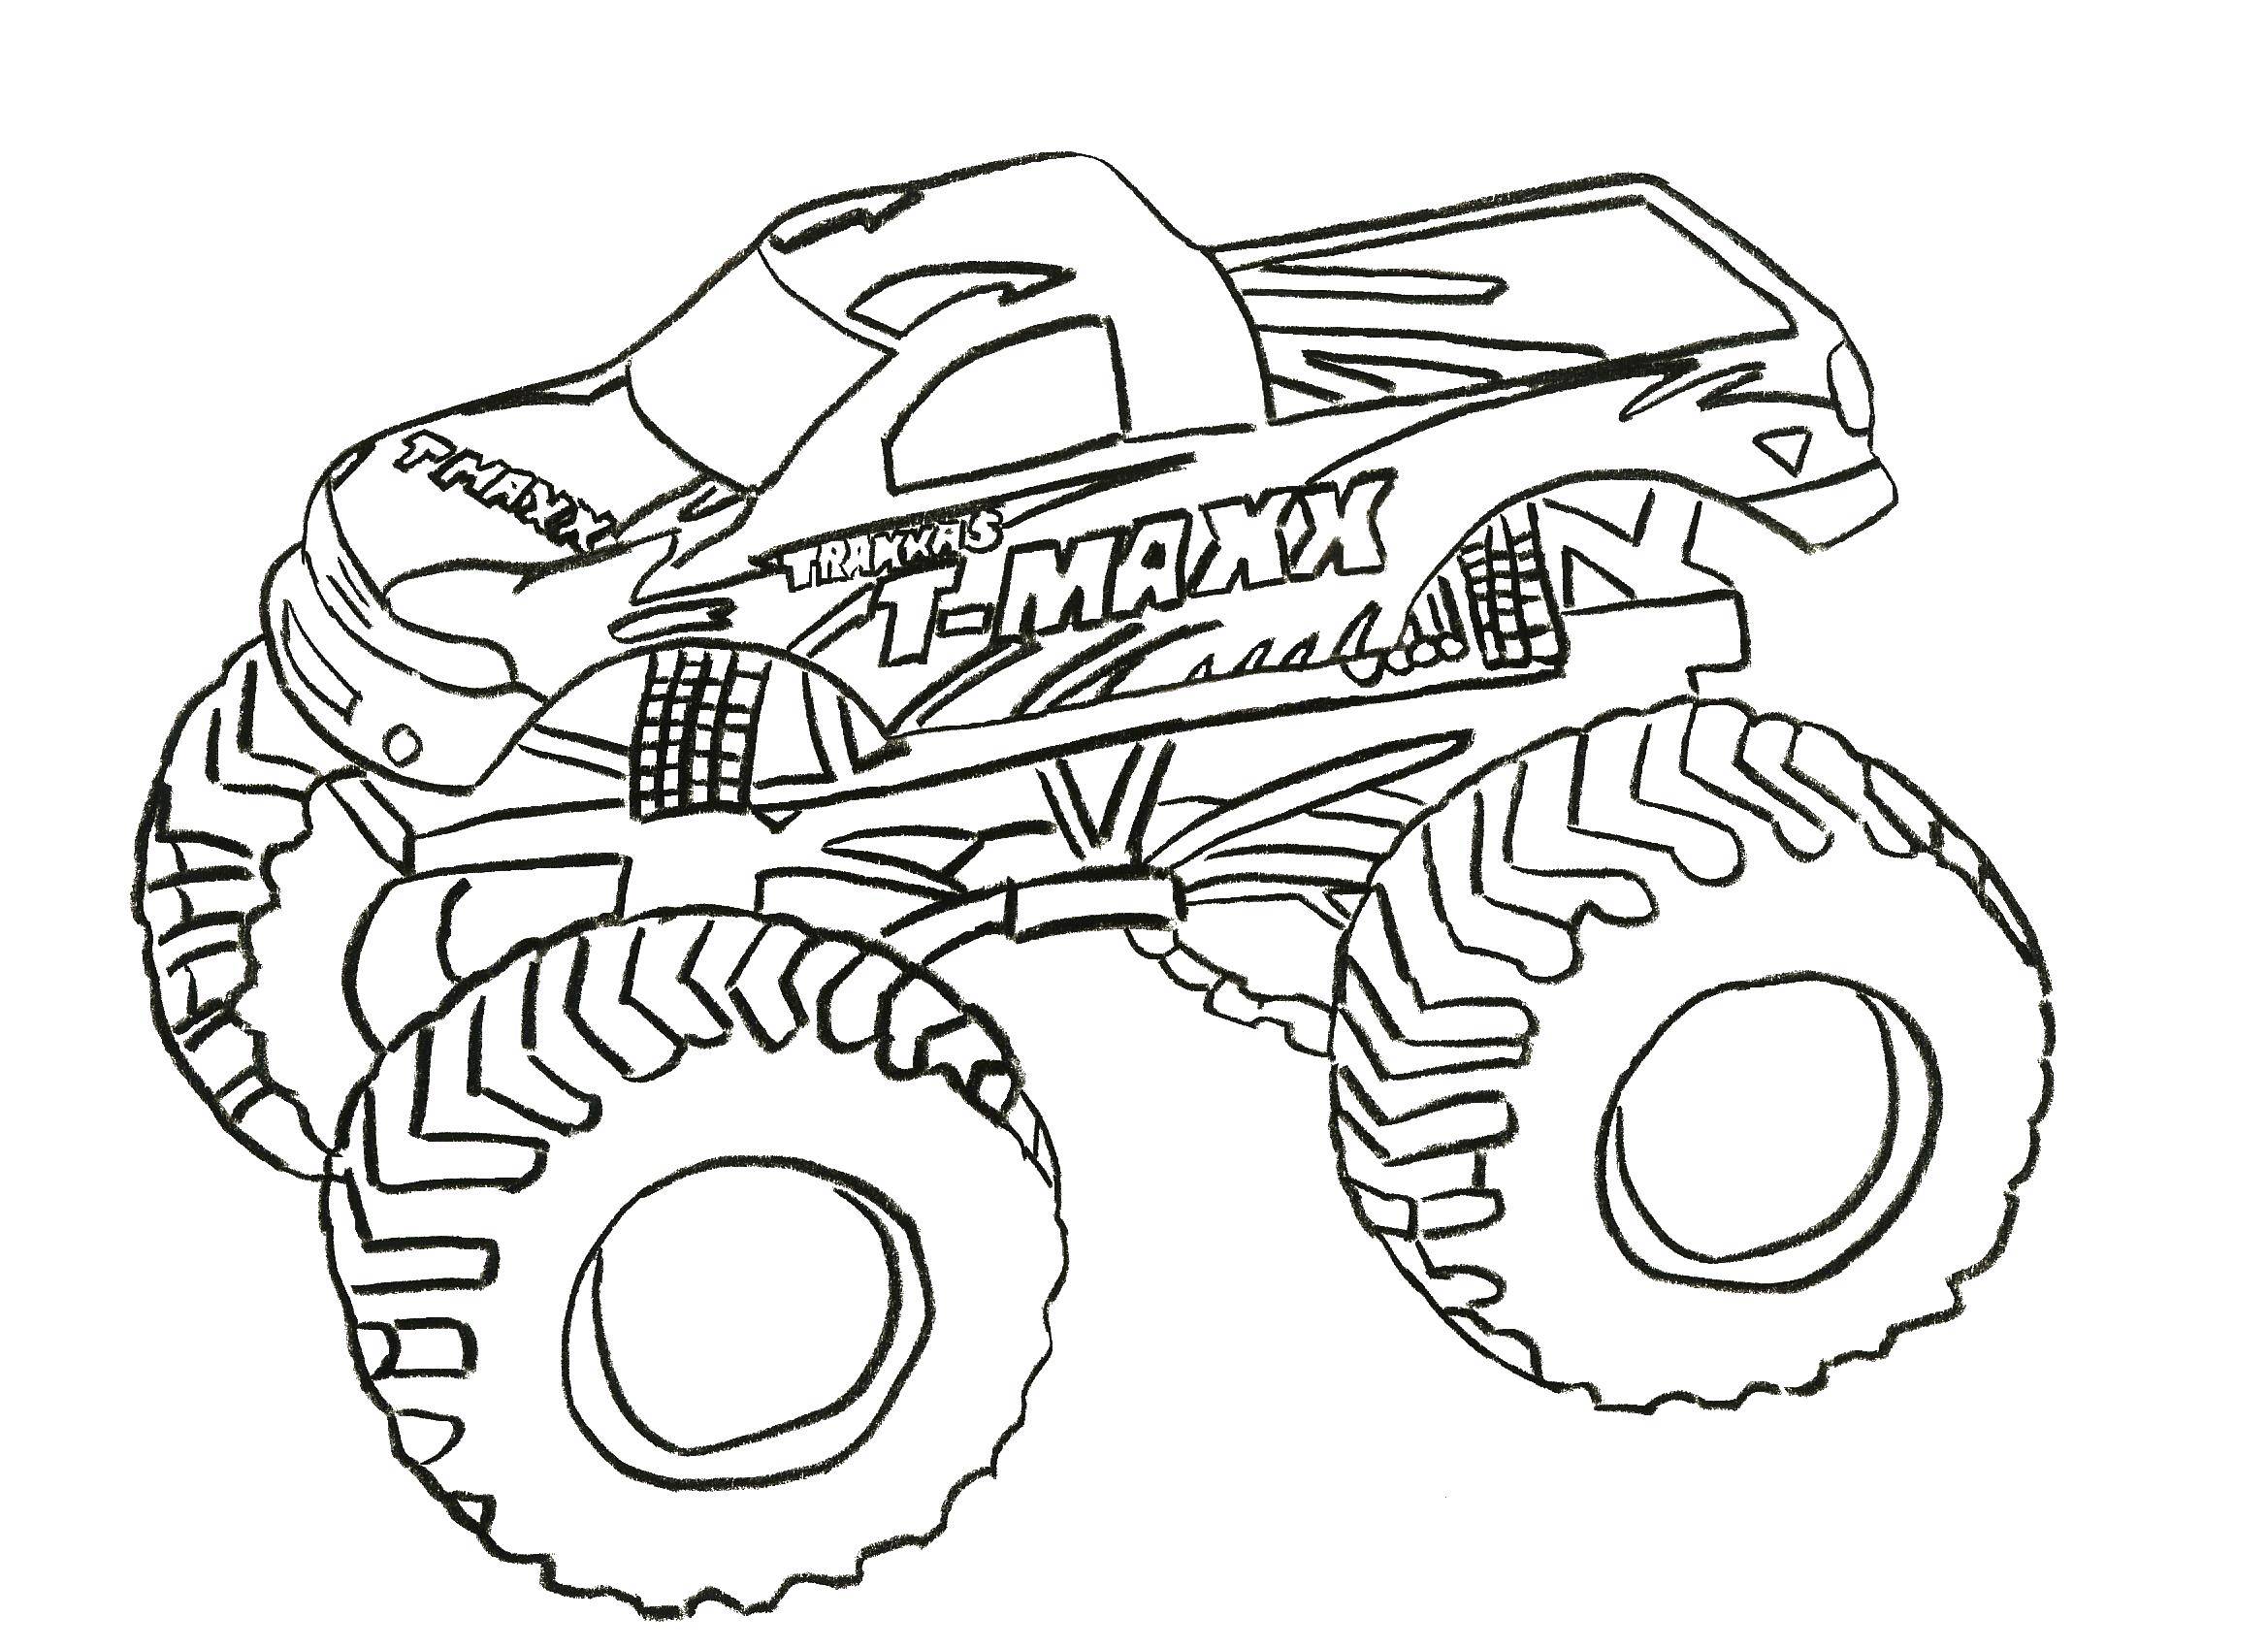 Coloring T max. Category machine . Tags:  cars, SUVs, t max.